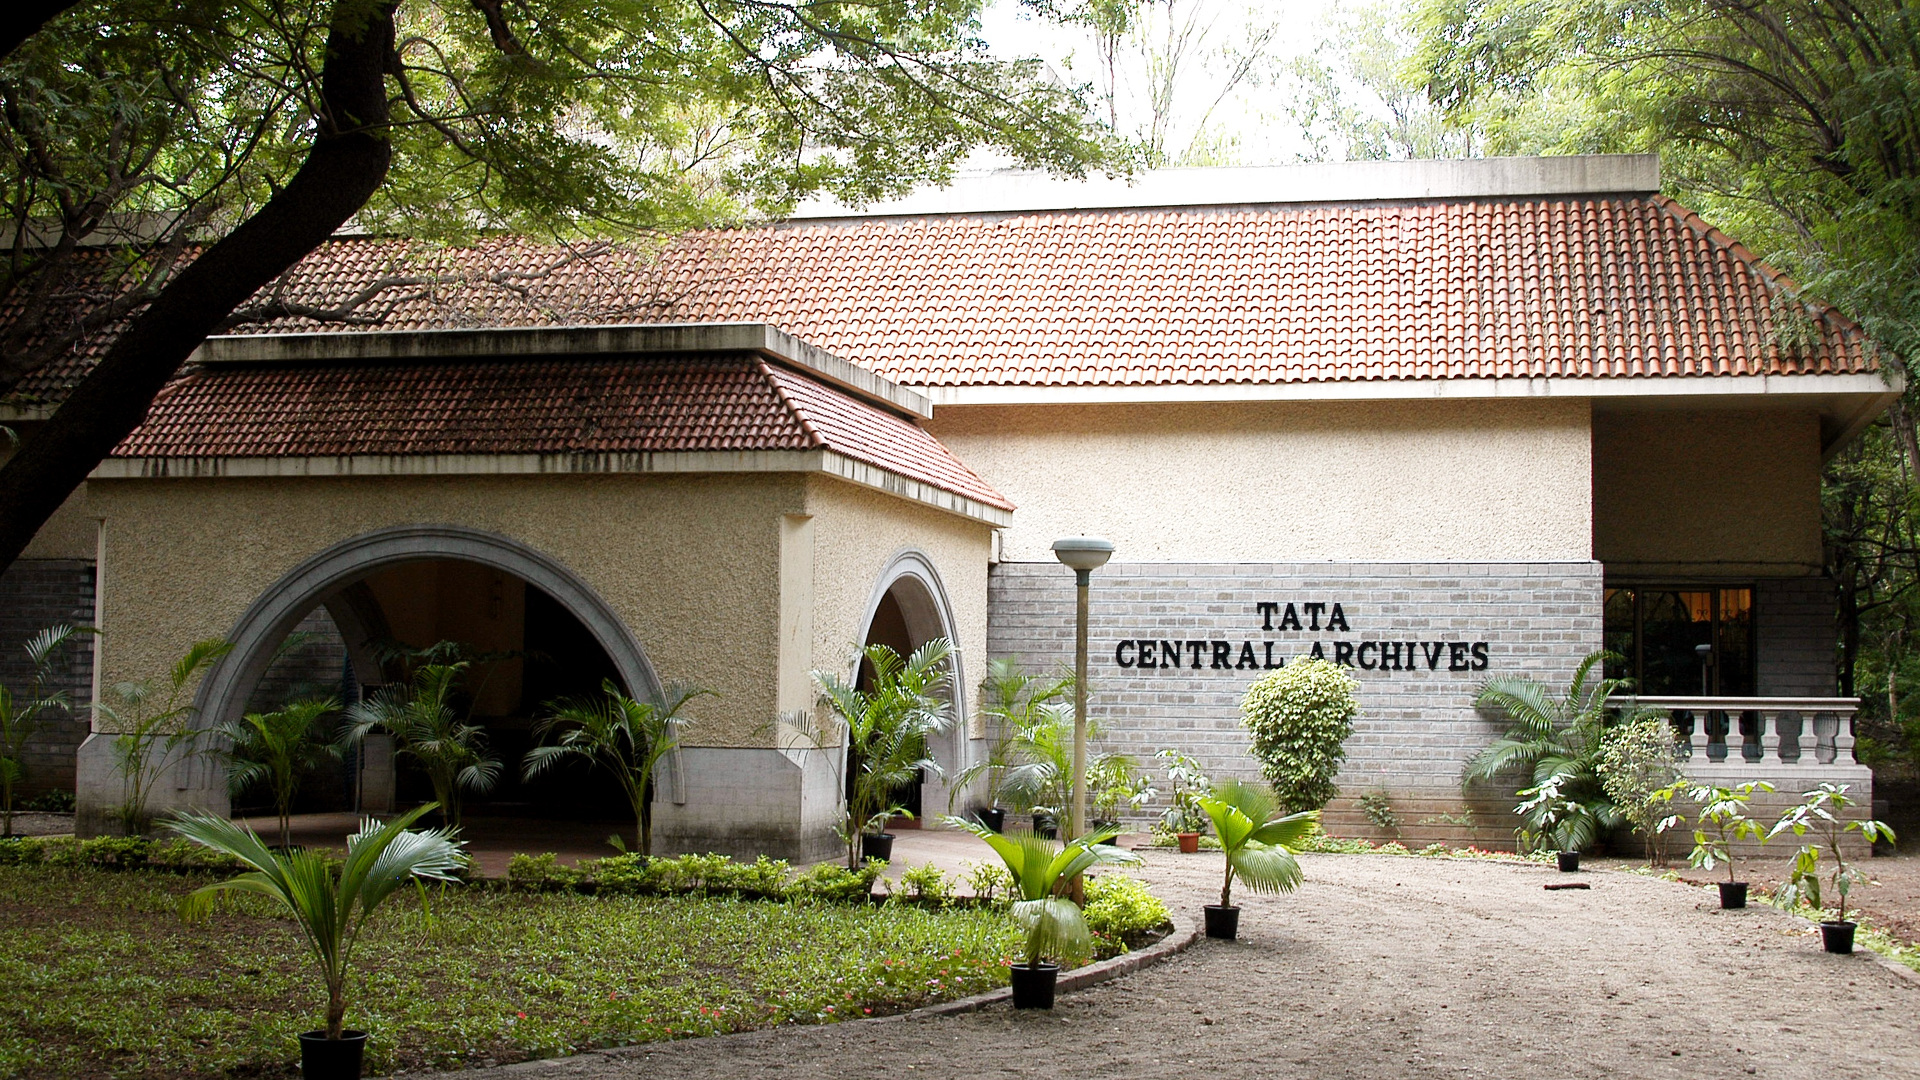 Tata Central Archives in Pune